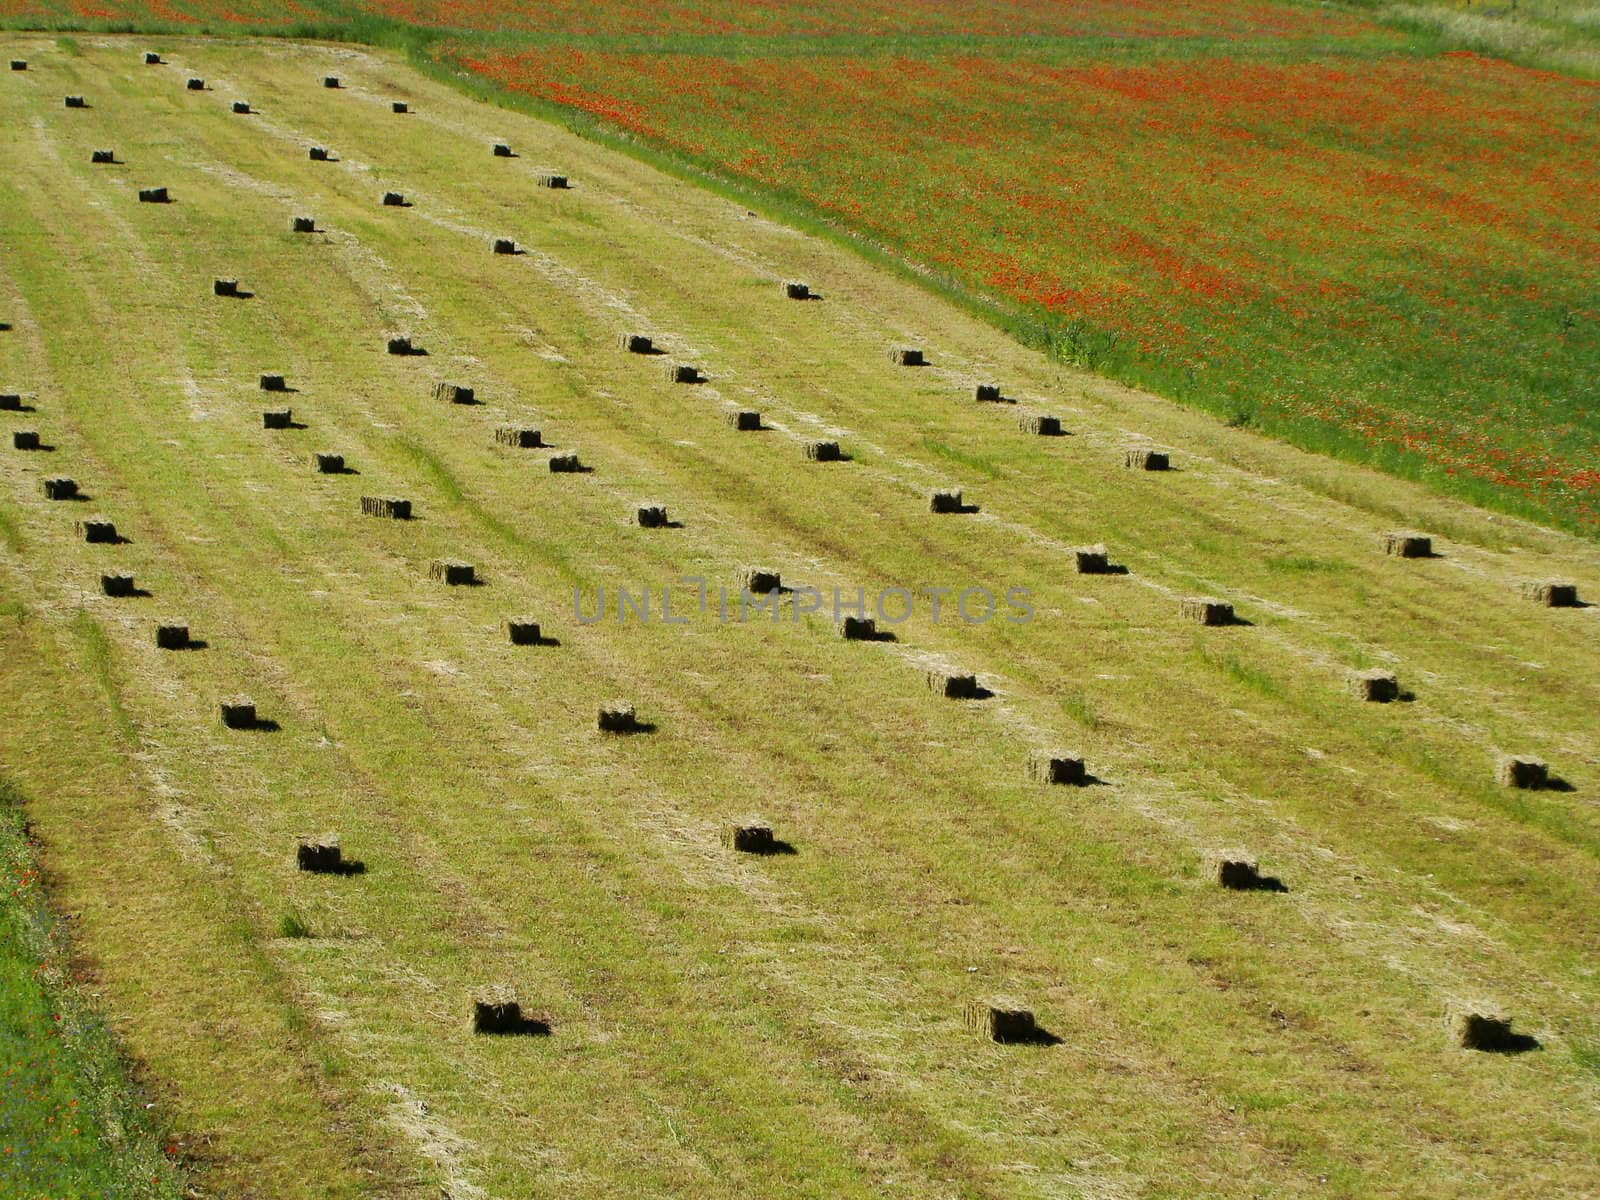 Straw Cubes On Field
agricultural landscape National Park of Sibillini Mountains central Italy Piano Grande ( Great Plain)VI 2007